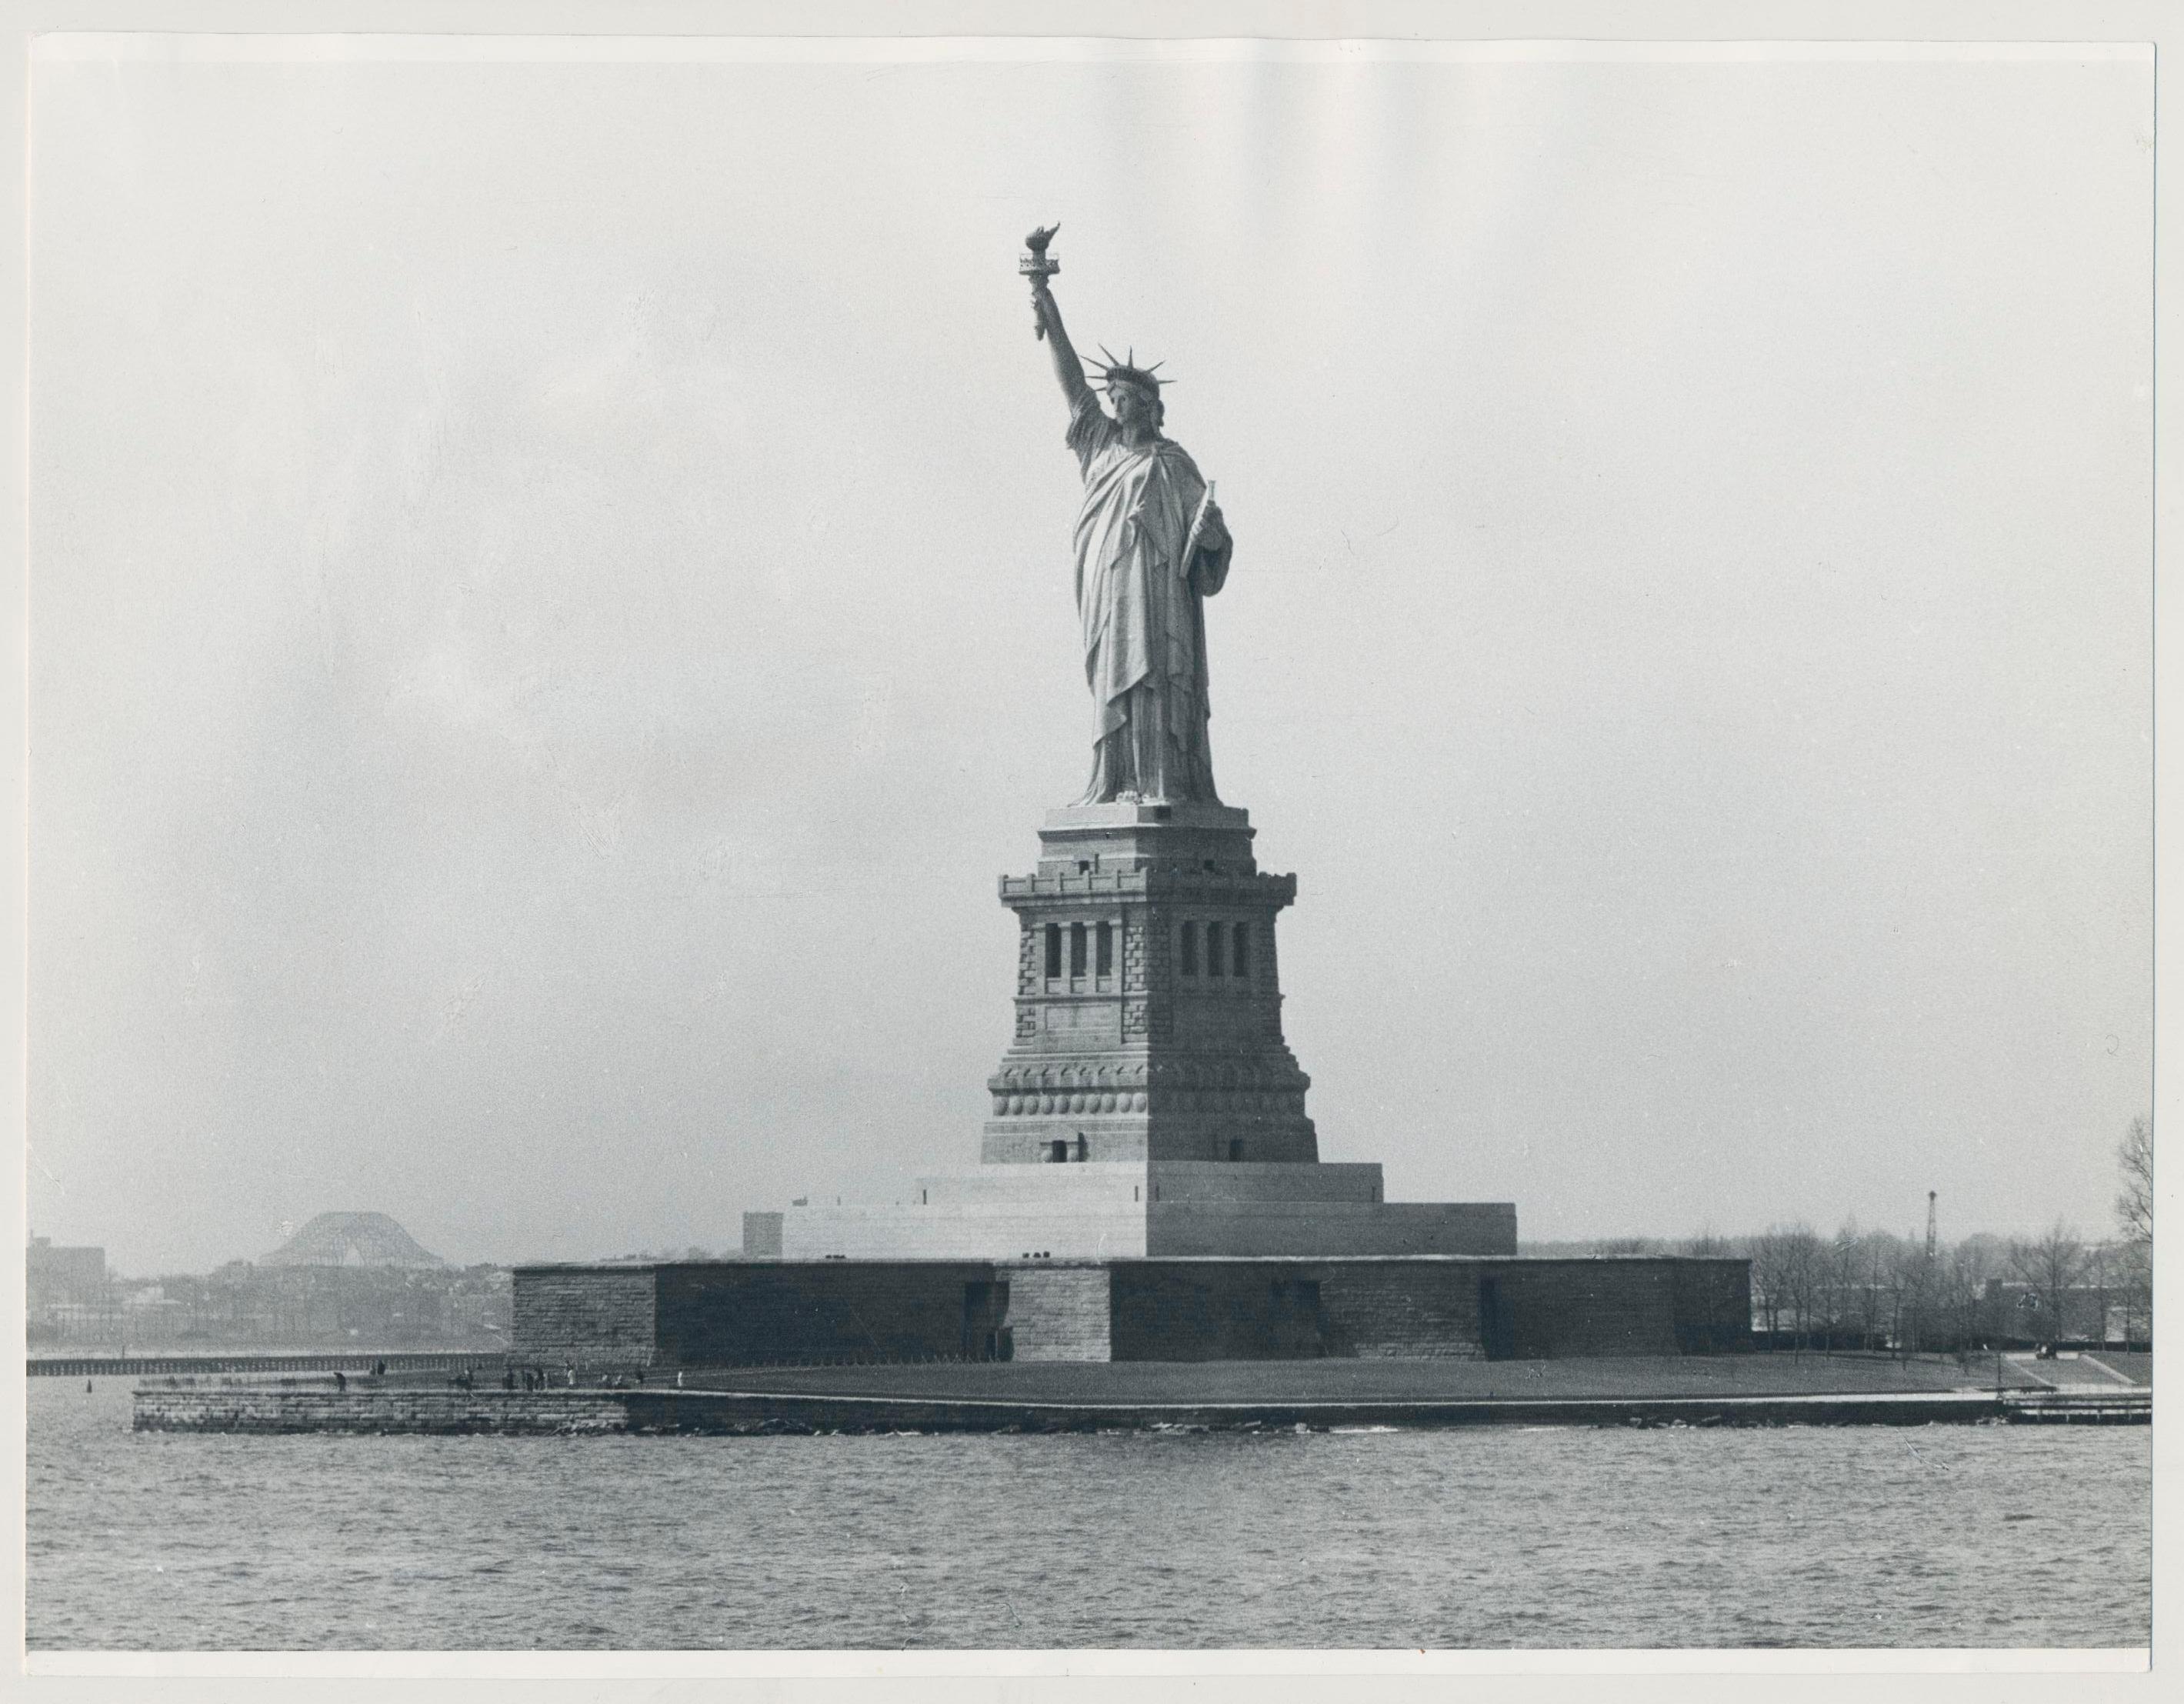 Erich Andres Black and White Photograph - Statue of Liberty, Black and White, Photography, USA, 1960s, 18 x 23.3 cm